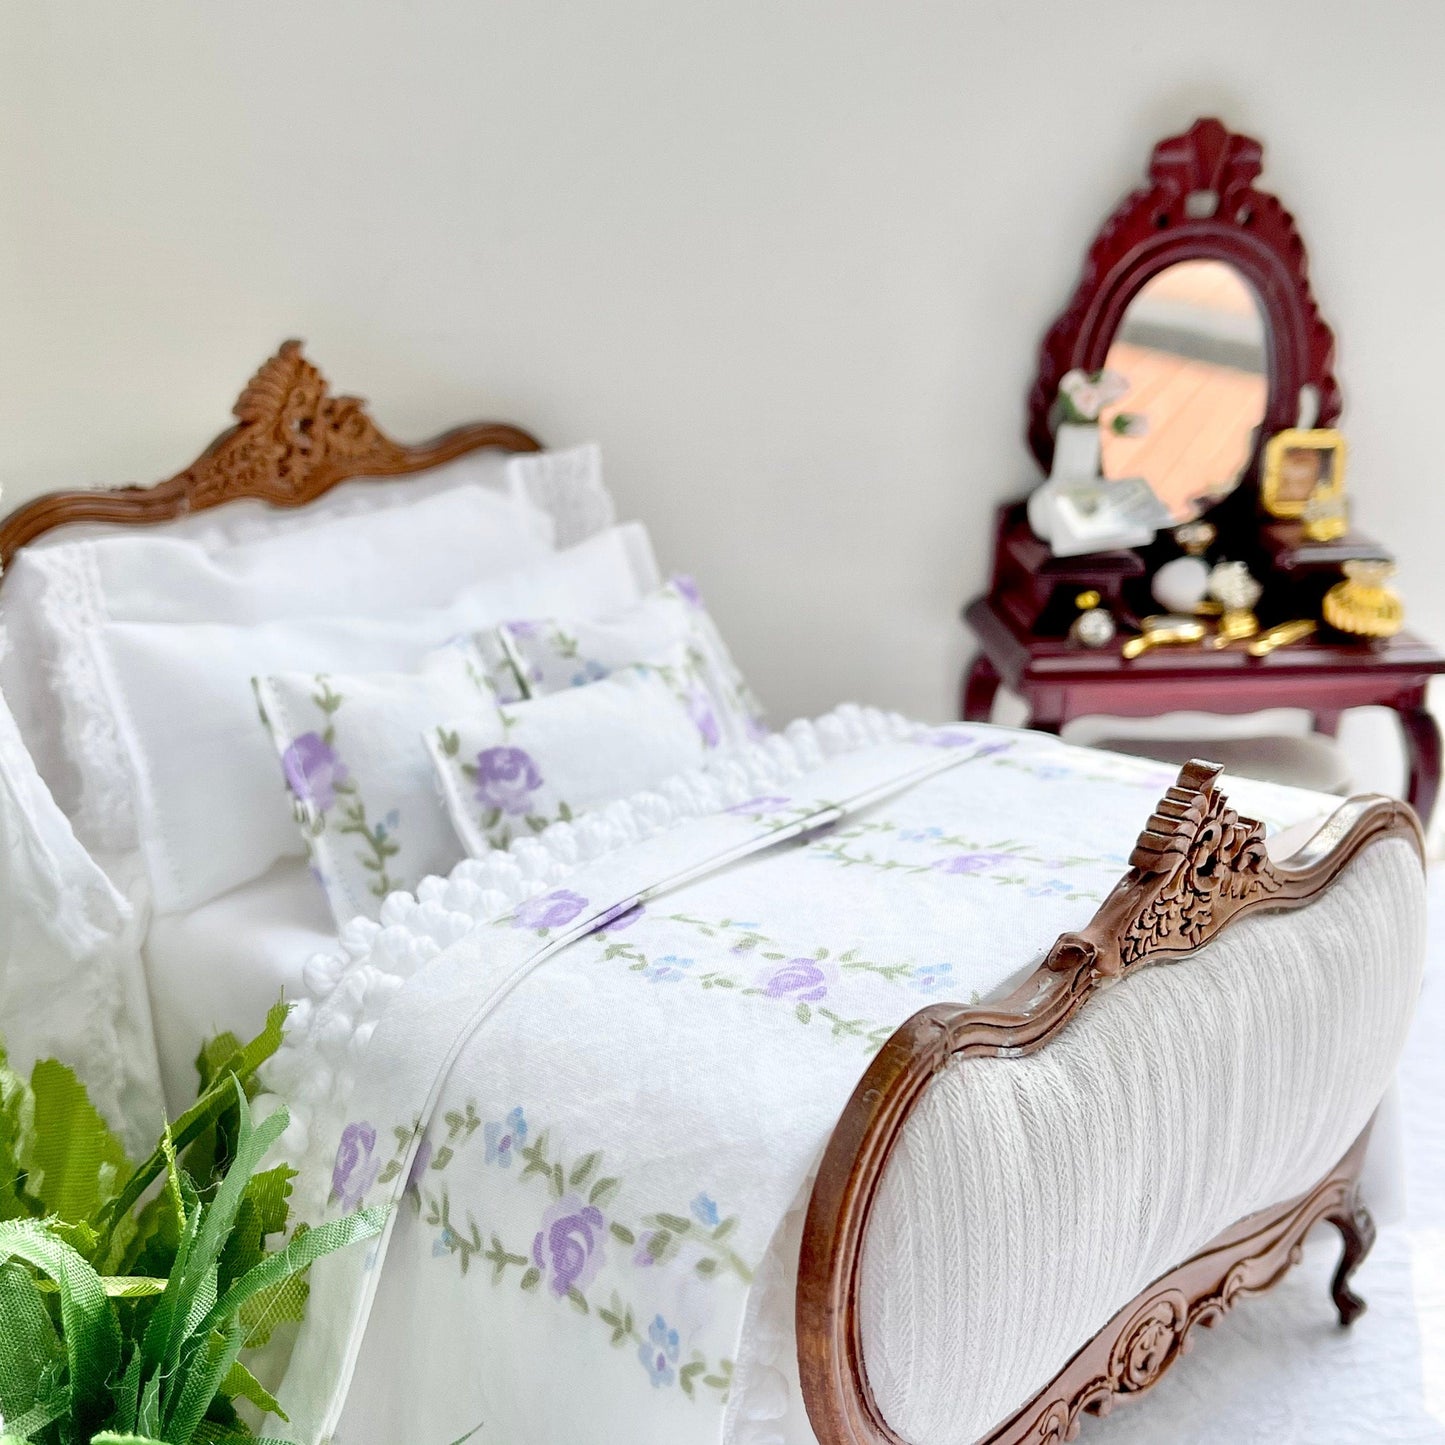 Chantallena Doll House Shabby Cottage - Eight Piece White Cotton Bedding Set with Lavender Rose Trellis Bed Runner